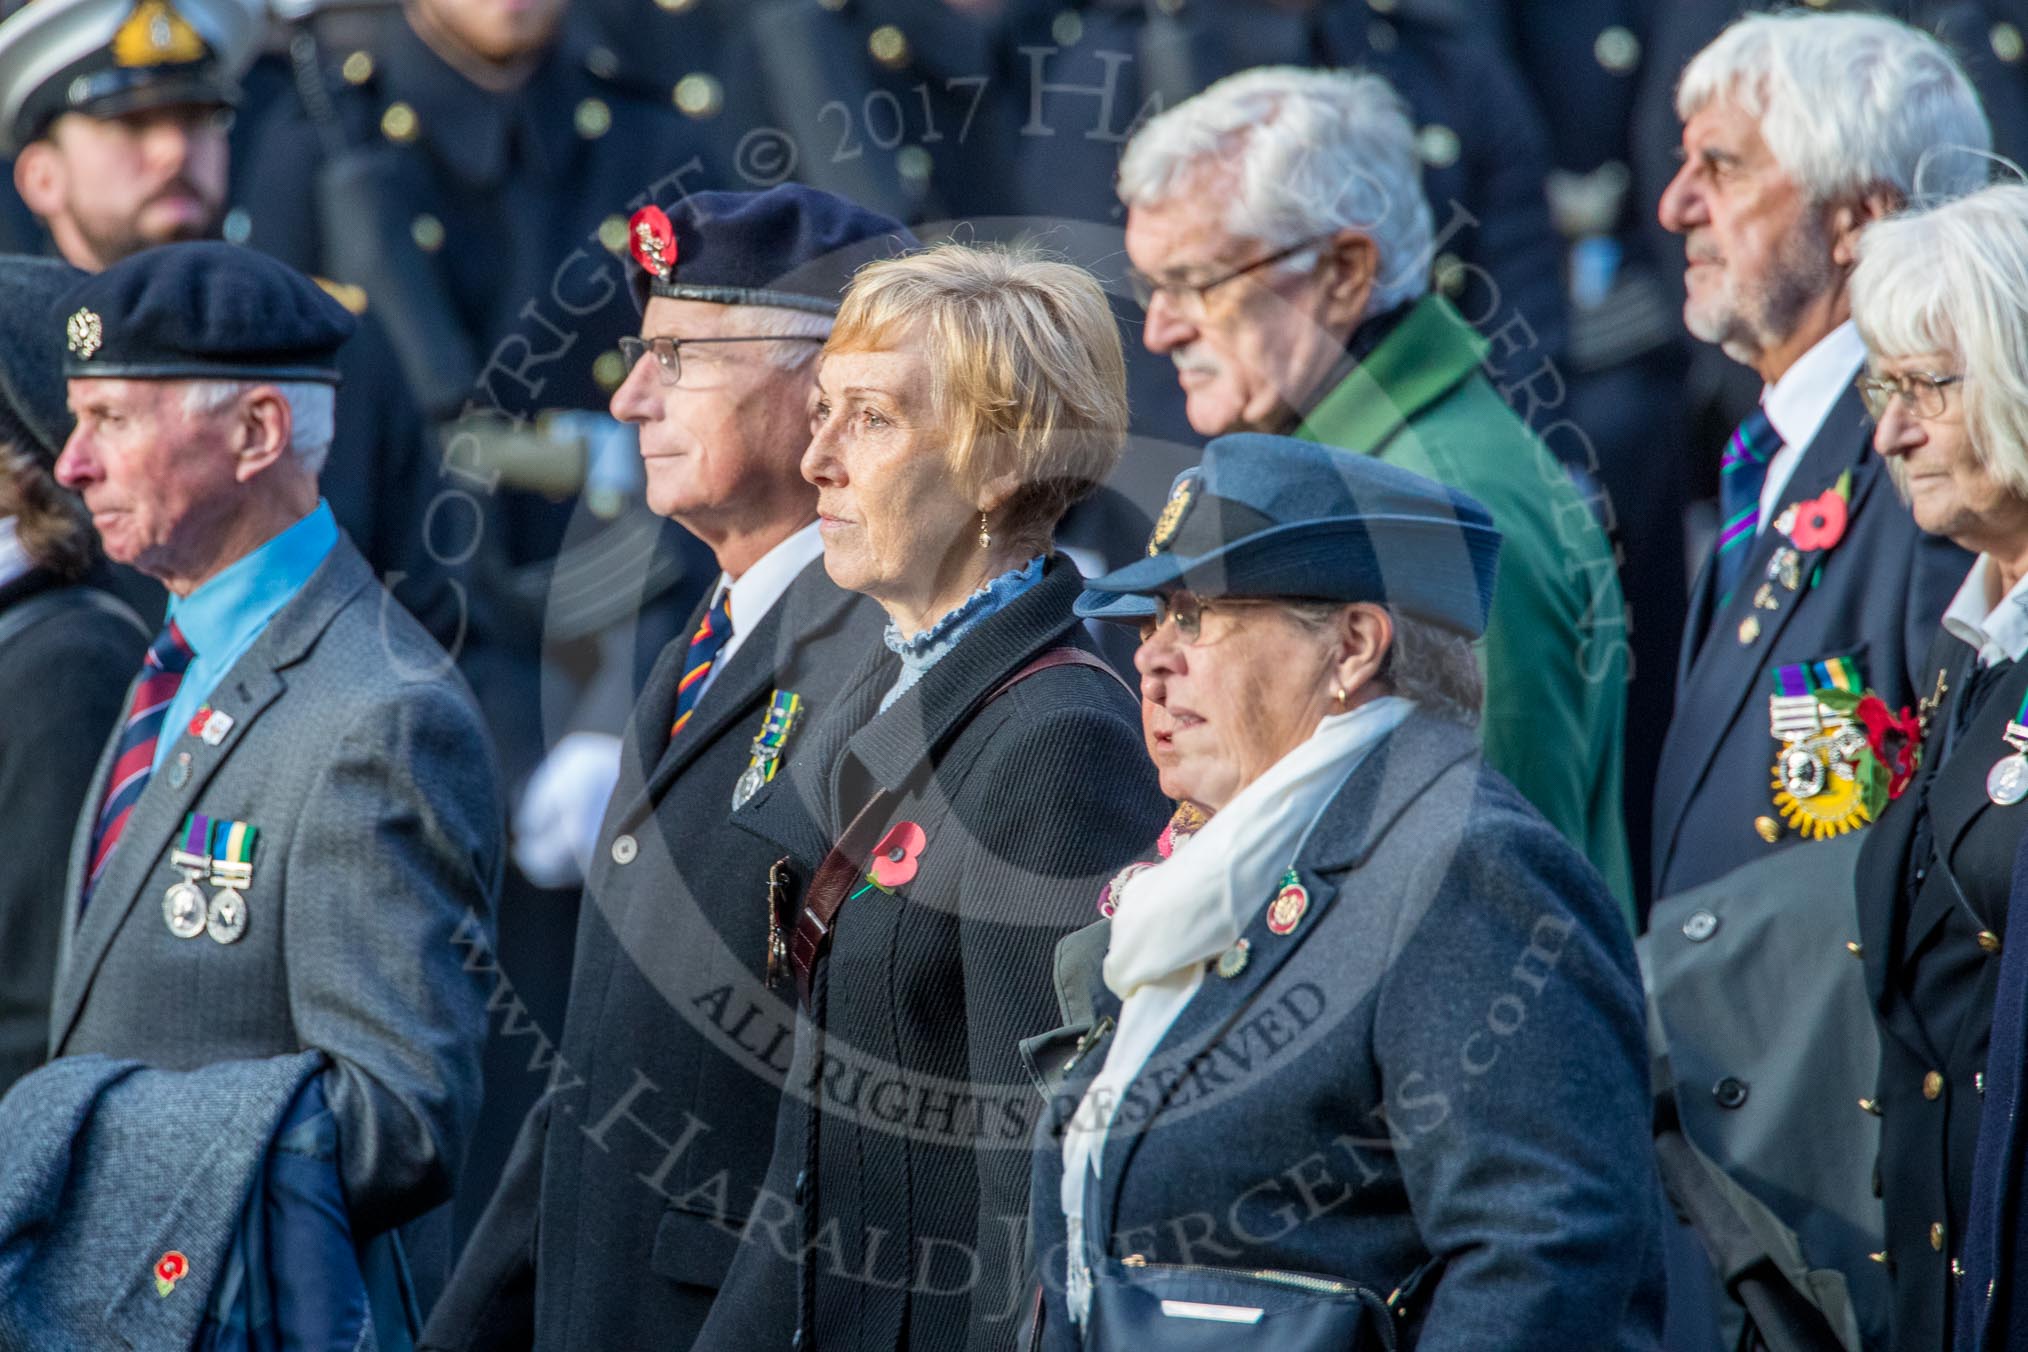 Aden Veterans Association (Group F16, 53 members) during the Royal British Legion March Past on Remembrance Sunday at the Cenotaph, Whitehall, Westminster, London, 11 November 2018, 11:52.